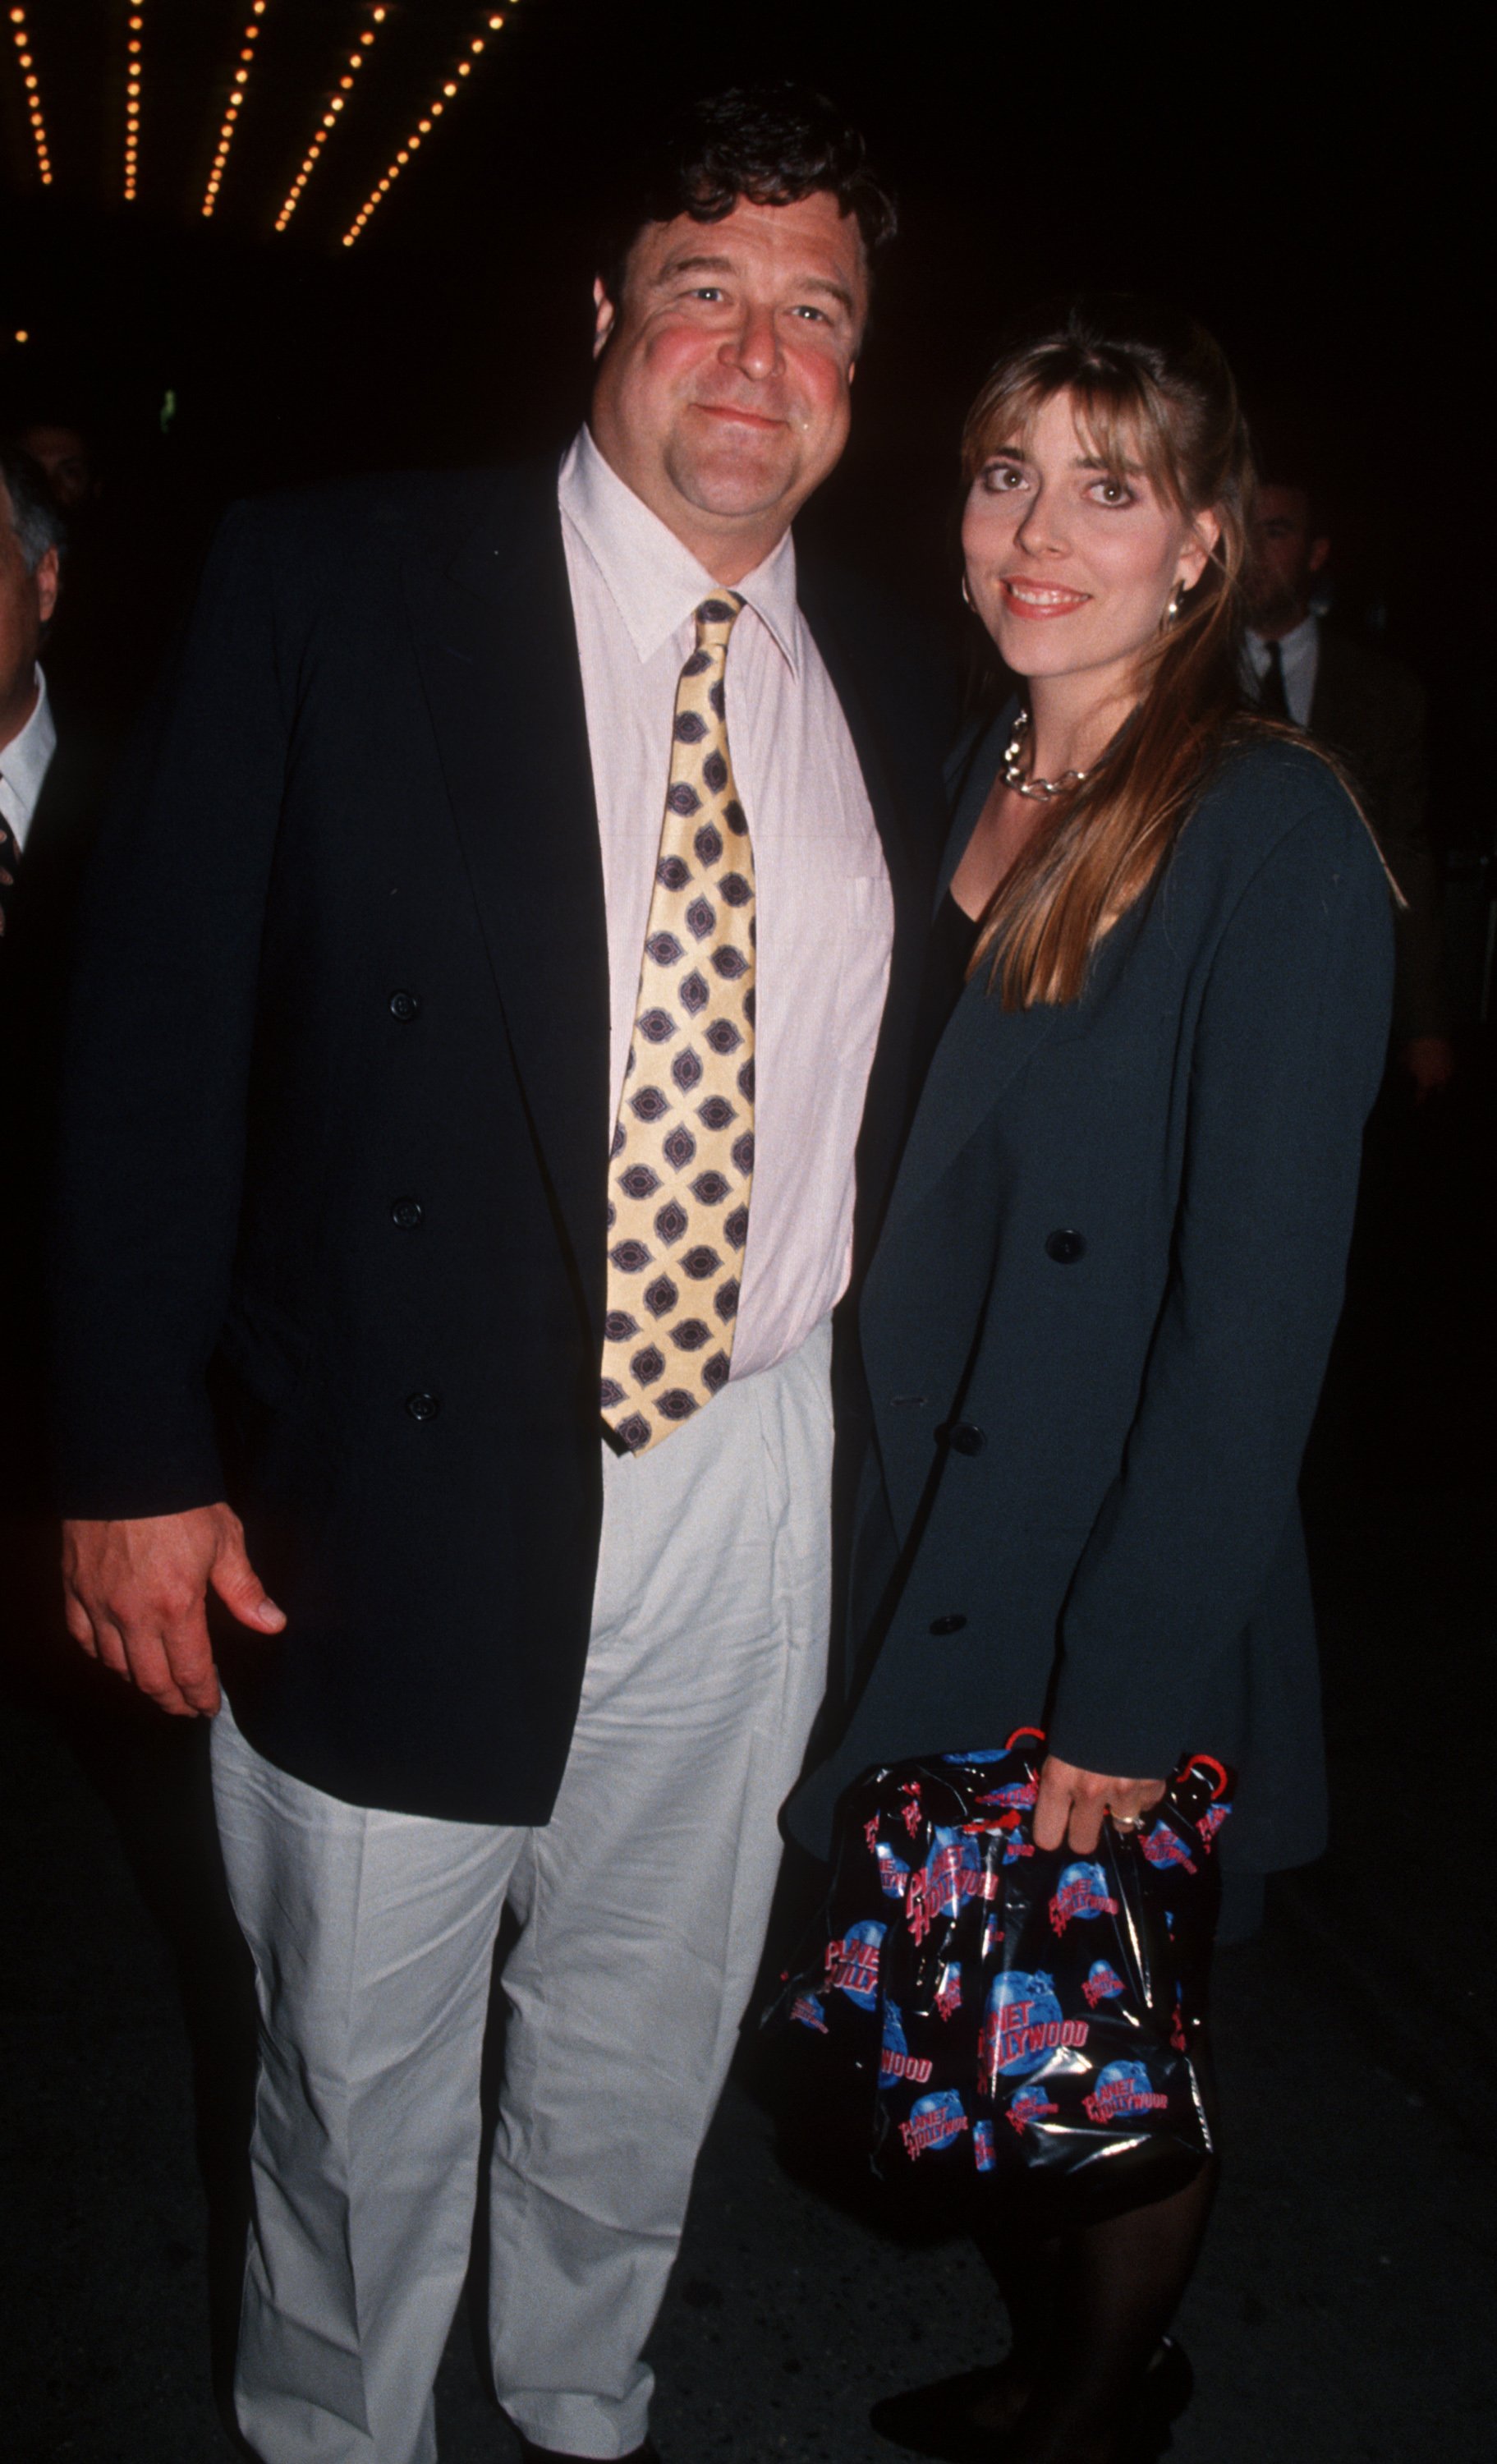 John Goodman and wife Annabeth Hartzog attending the premiere of 'The Flintstones' on May 23, 1994 at the Ziegfeld Theater in New York City, New York | Source: Getty Images 